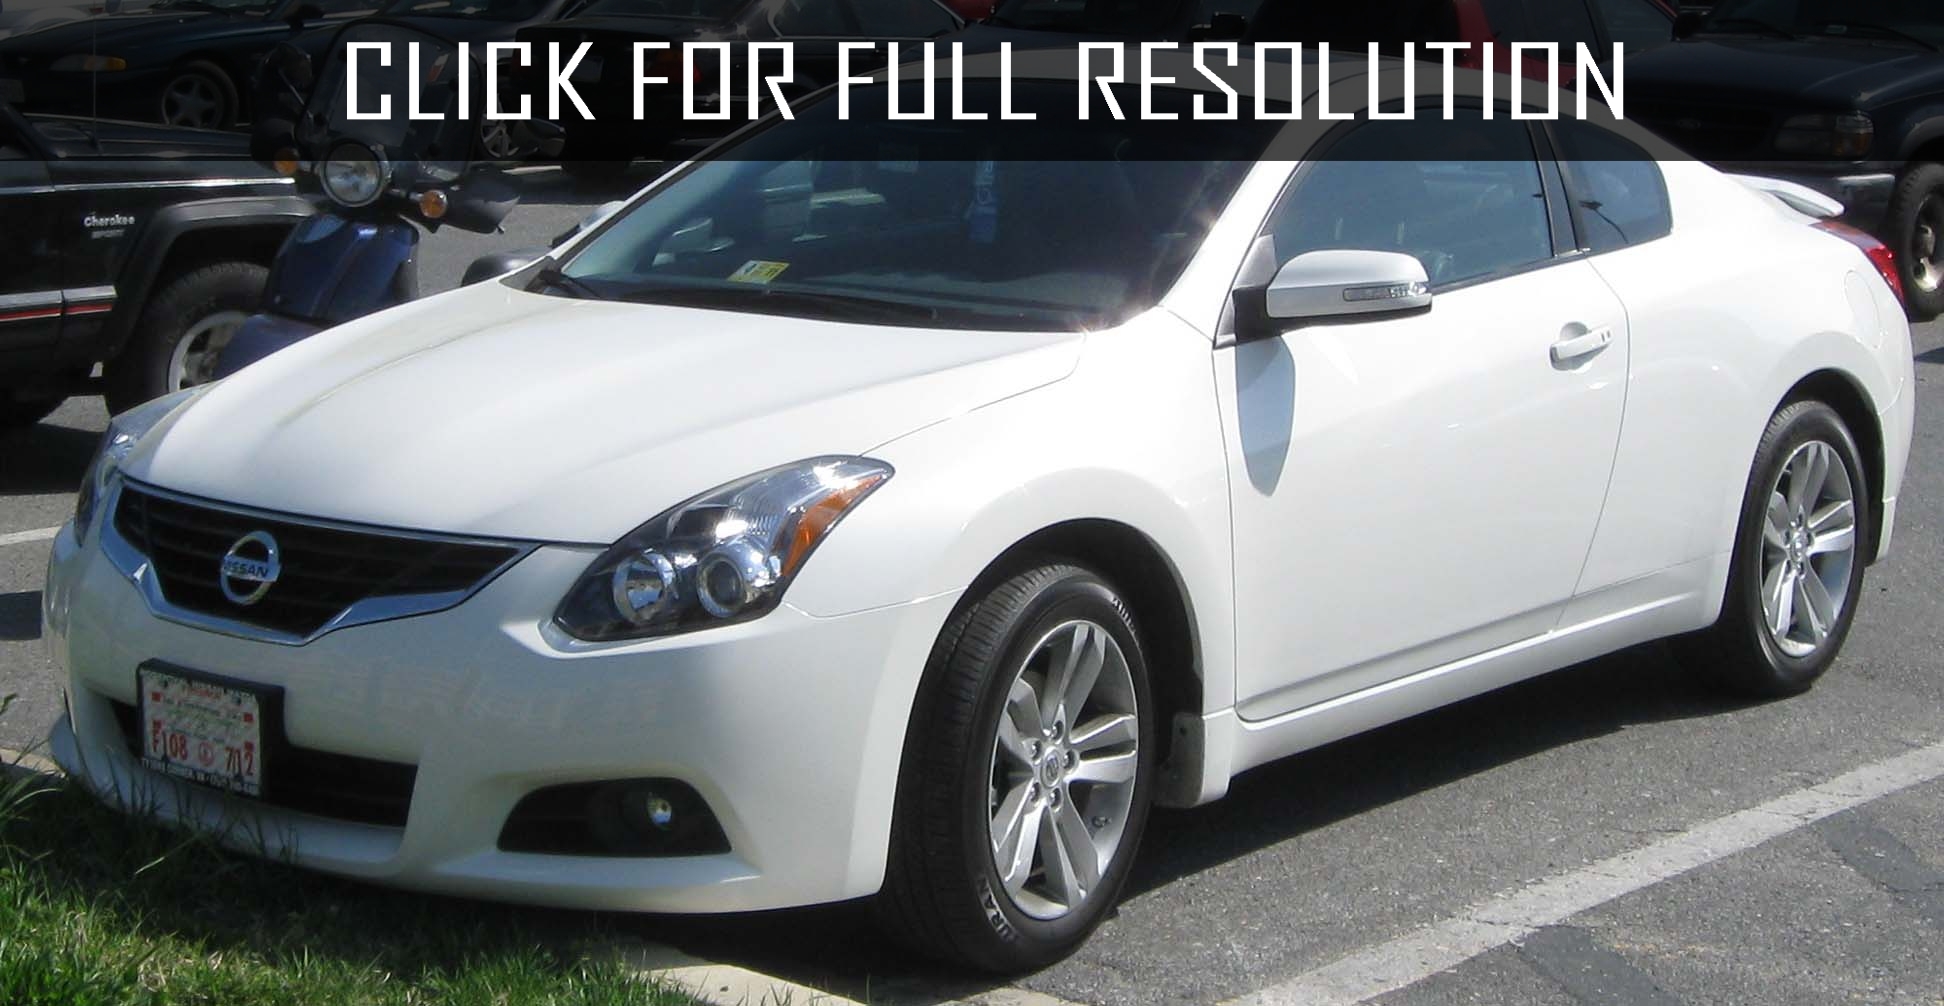 Nissan Altima Coupe 2010